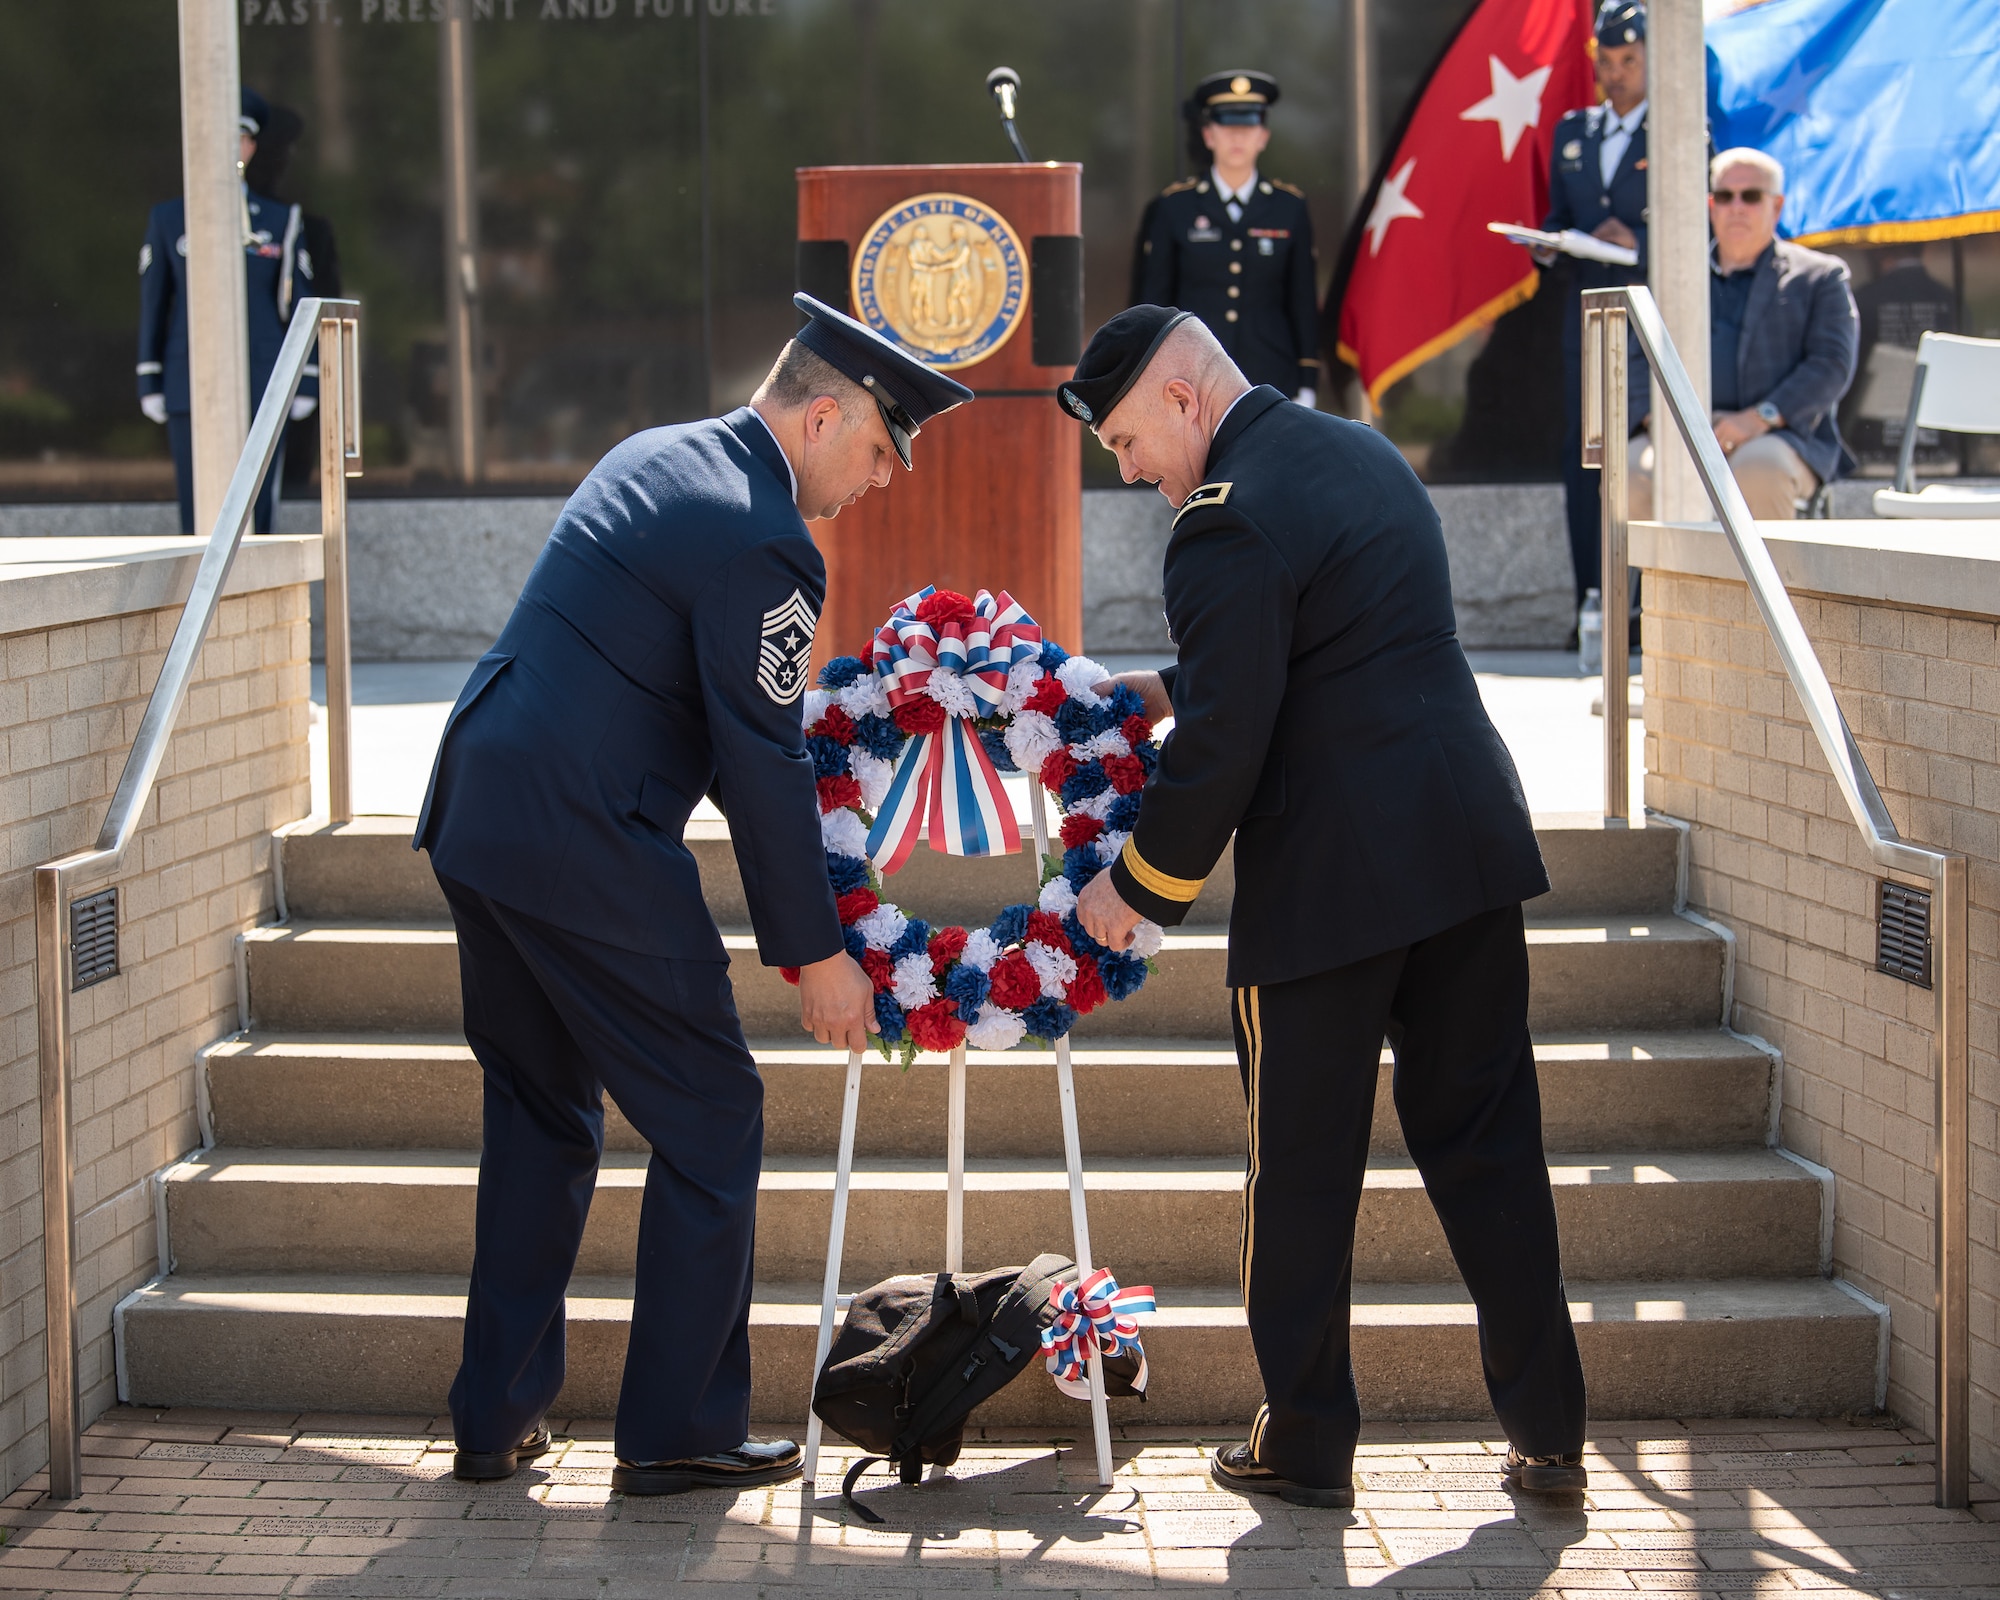 Air Force Chief Master Sgt. James R. Tongate, left, Kentucky Air National Guard state command chief; and Army Maj. Gen. Haldane B. Lamberton, the adjutant general of the Commonwealth of Kentucky, place a wreath at the Kentucky National Guard Memorial during a ceremony in Frankfort, Ky., May 30, 2022. The memorial honors 286 Soldiers and Airmen from the Kentucky Guard who have paid the ultimate price for freedom since 1912. (U.S. Air National Guard photo by Dale Greer)